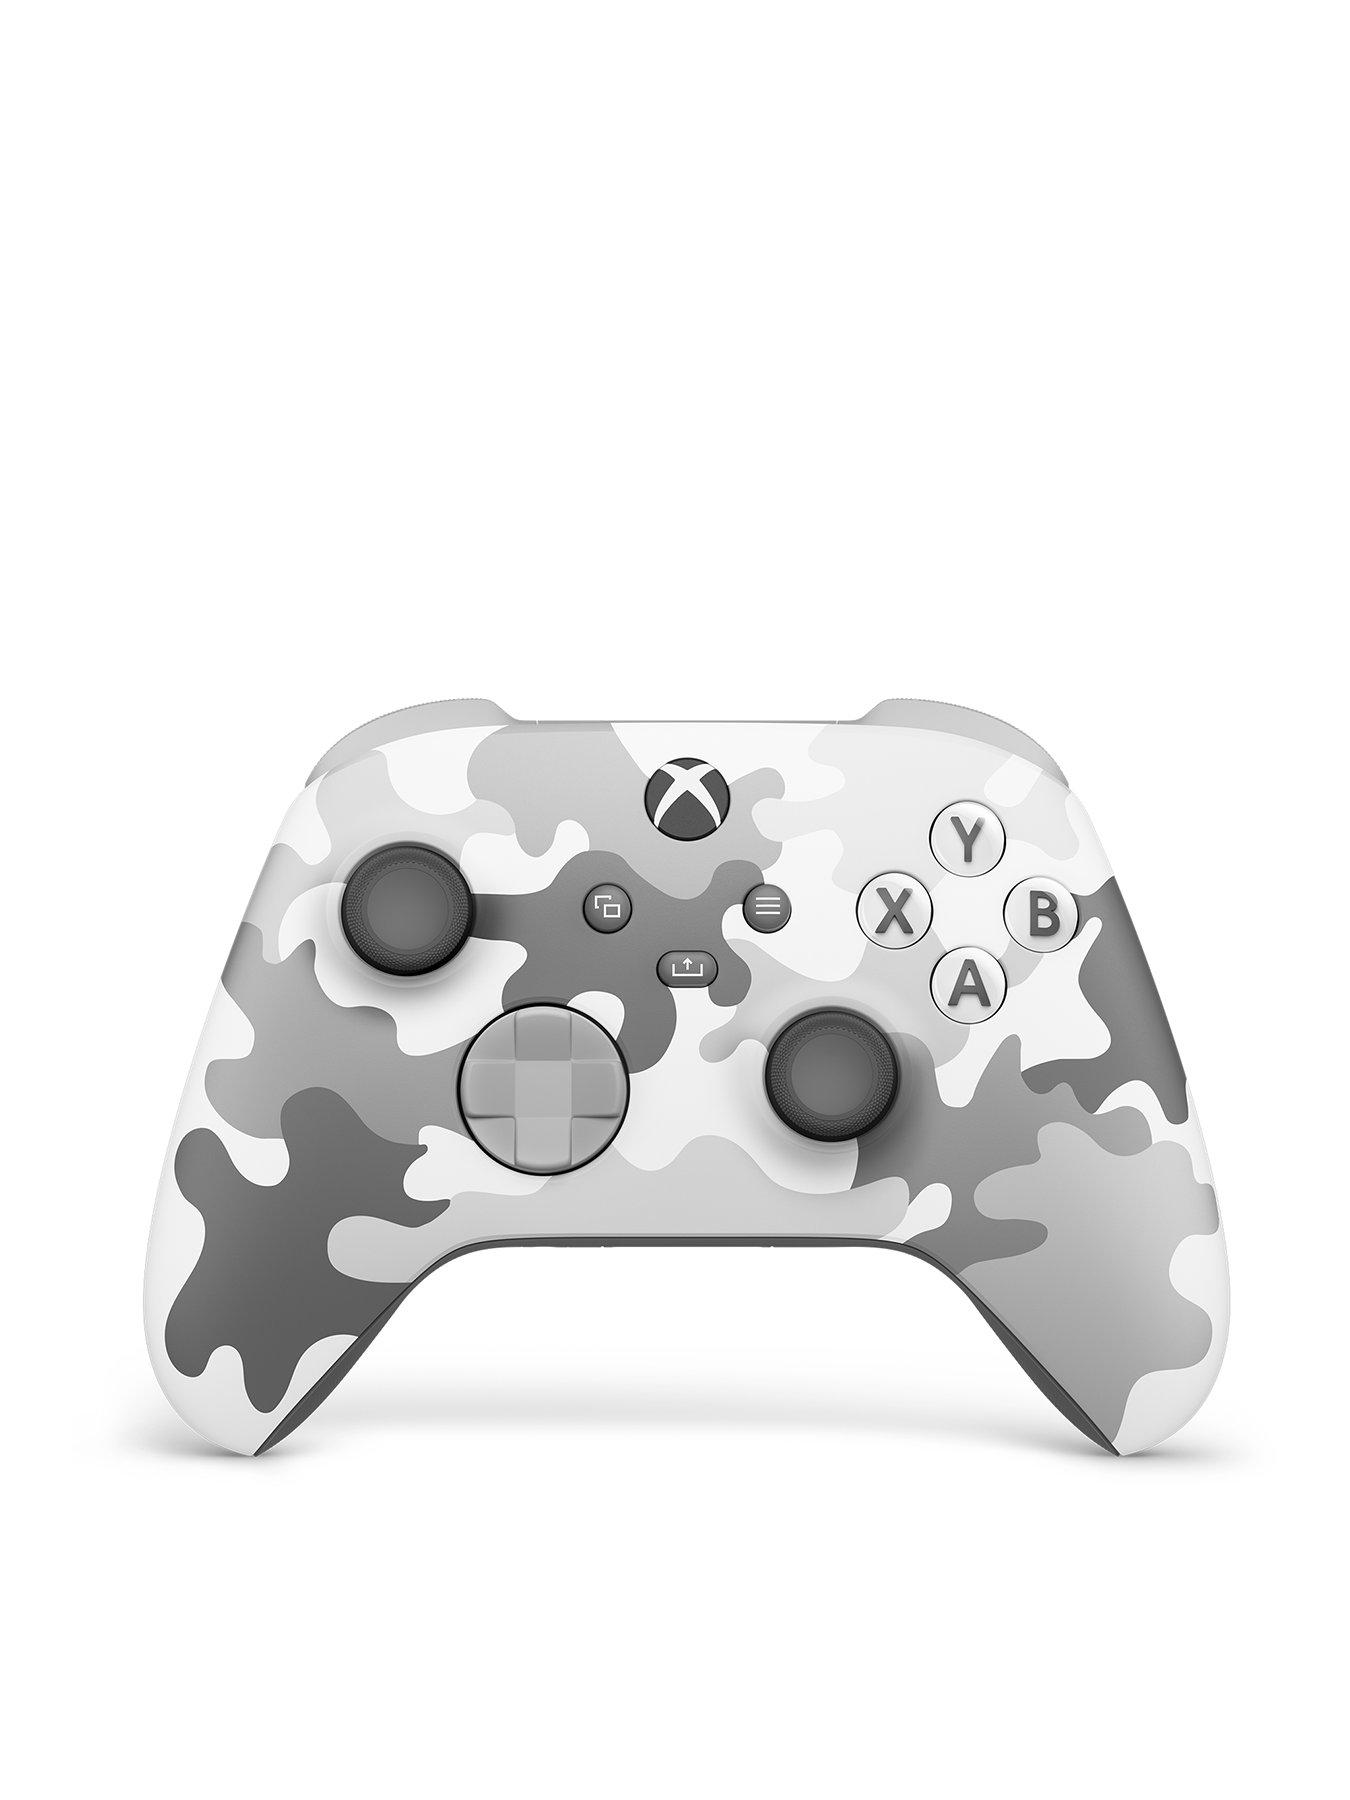 https://media.very.co.uk/i/very/VXJA2_SQ1_0000000099_N_A_SLf/xbox-wireless-controller-ndash-arctic-camo-special-edition-for-xbox-series-xs-xbox-one-and-windows-devices.jpg?$180x240_retinamobilex2$&$roundel_very$&p1_img=new_2017